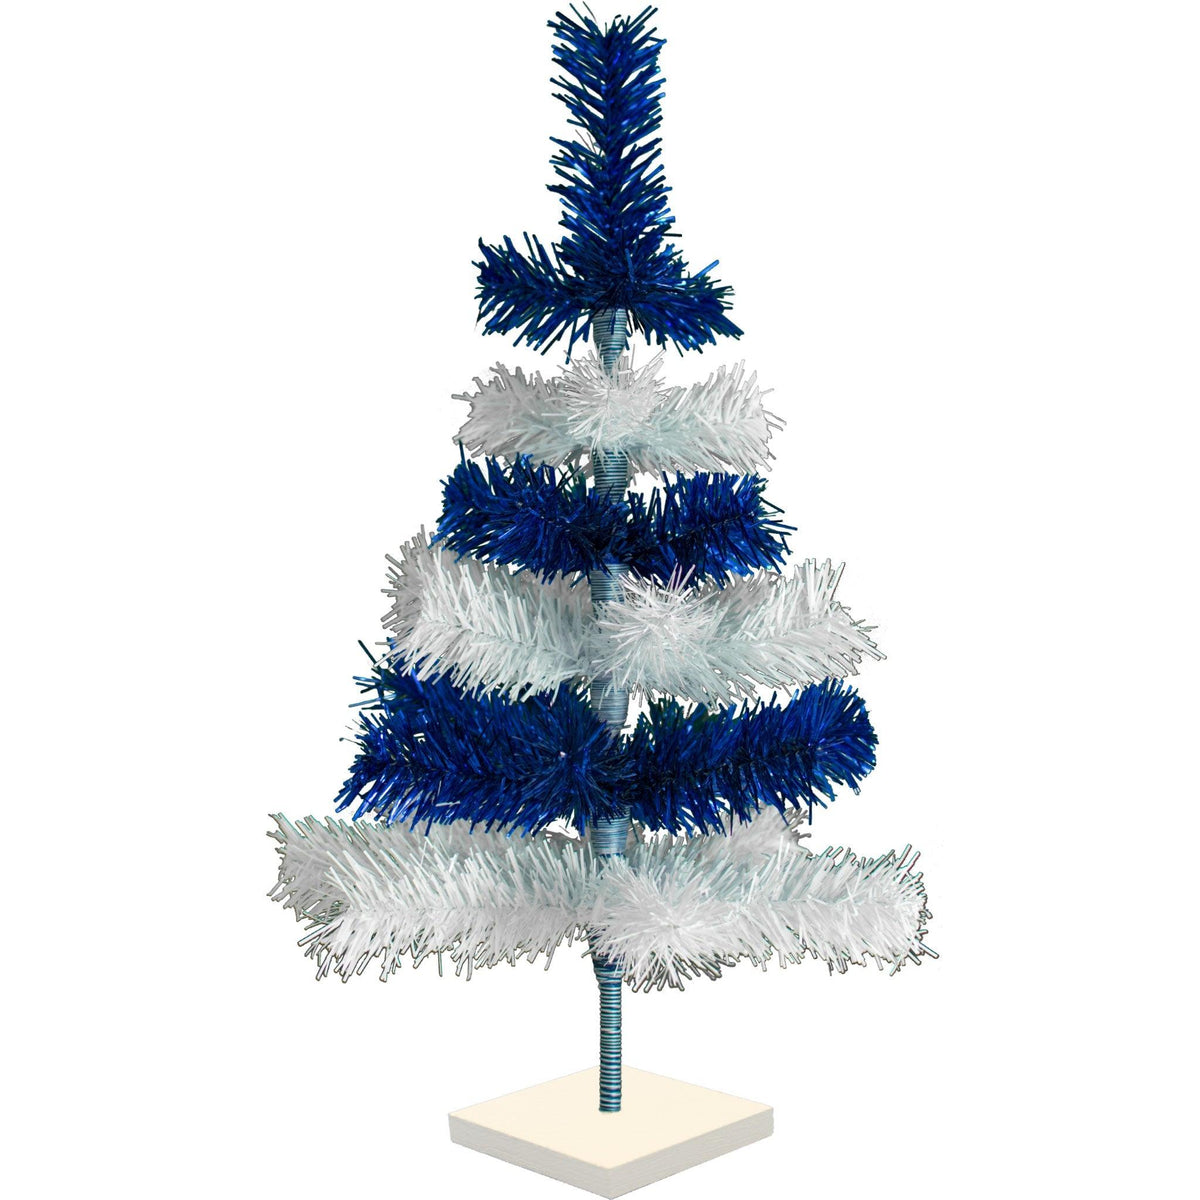 18in - 5FT Tall Blue & White Layered Tinsel Christmas Trees on sale at leedispay.com